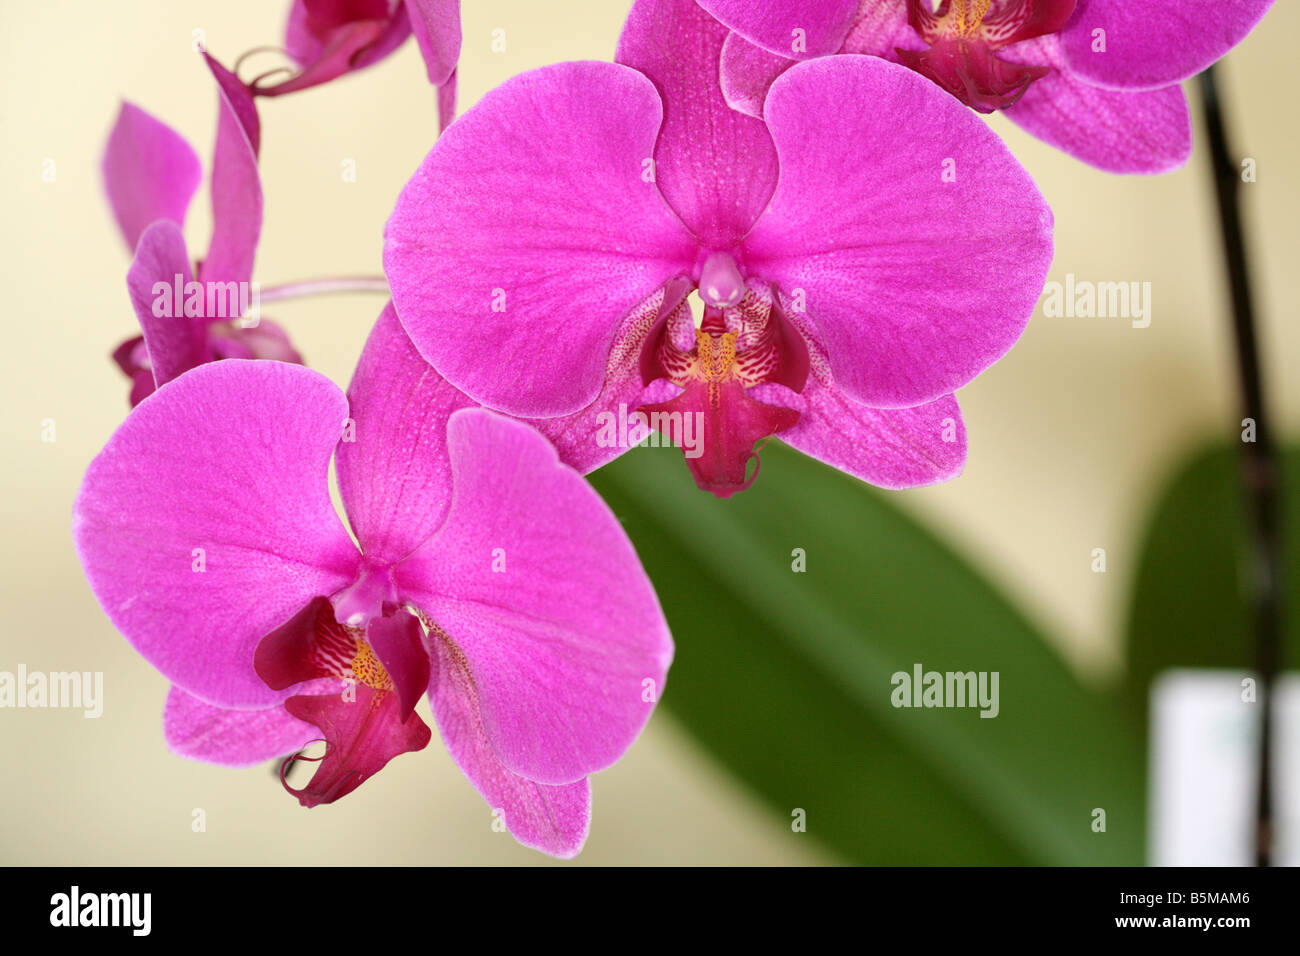 Phalaenopsis orchids from Panama in Central America. Stock Photo